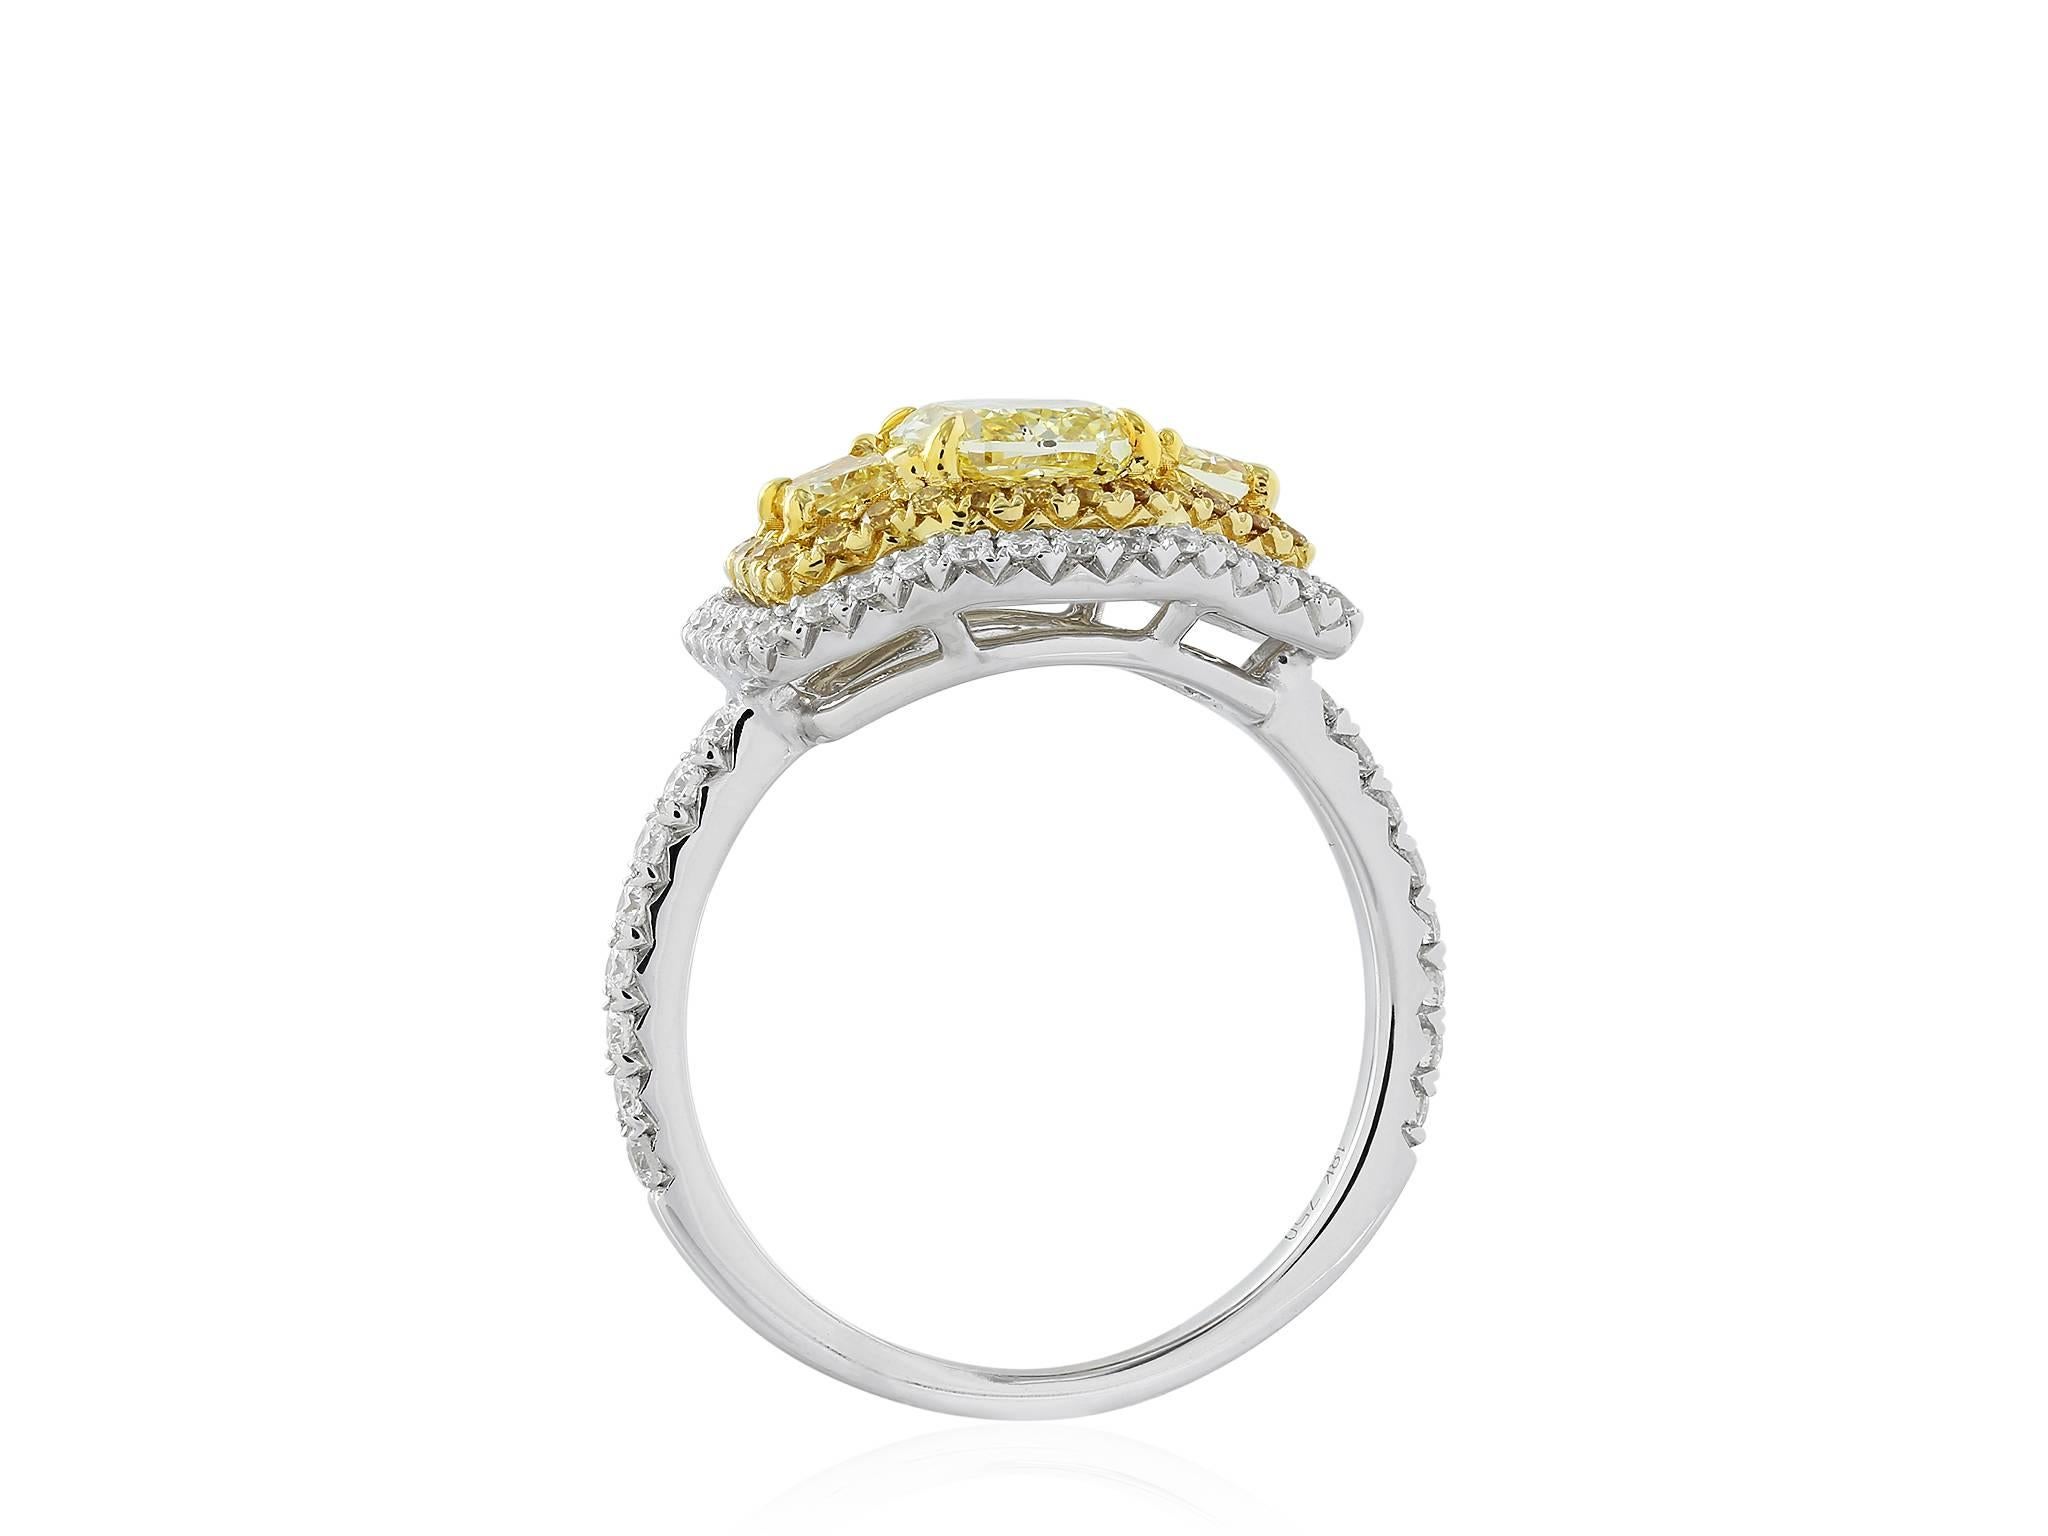 Two tone 18 karat yellow and white gold 3 stone ring consisting of 1 cushion cut canary diamond weighing 1.04 carts, the center stone is flanked by 2 trapezoid canary diamonds weighing .46 carats, the 3 stone are set with .21 carats total weight of